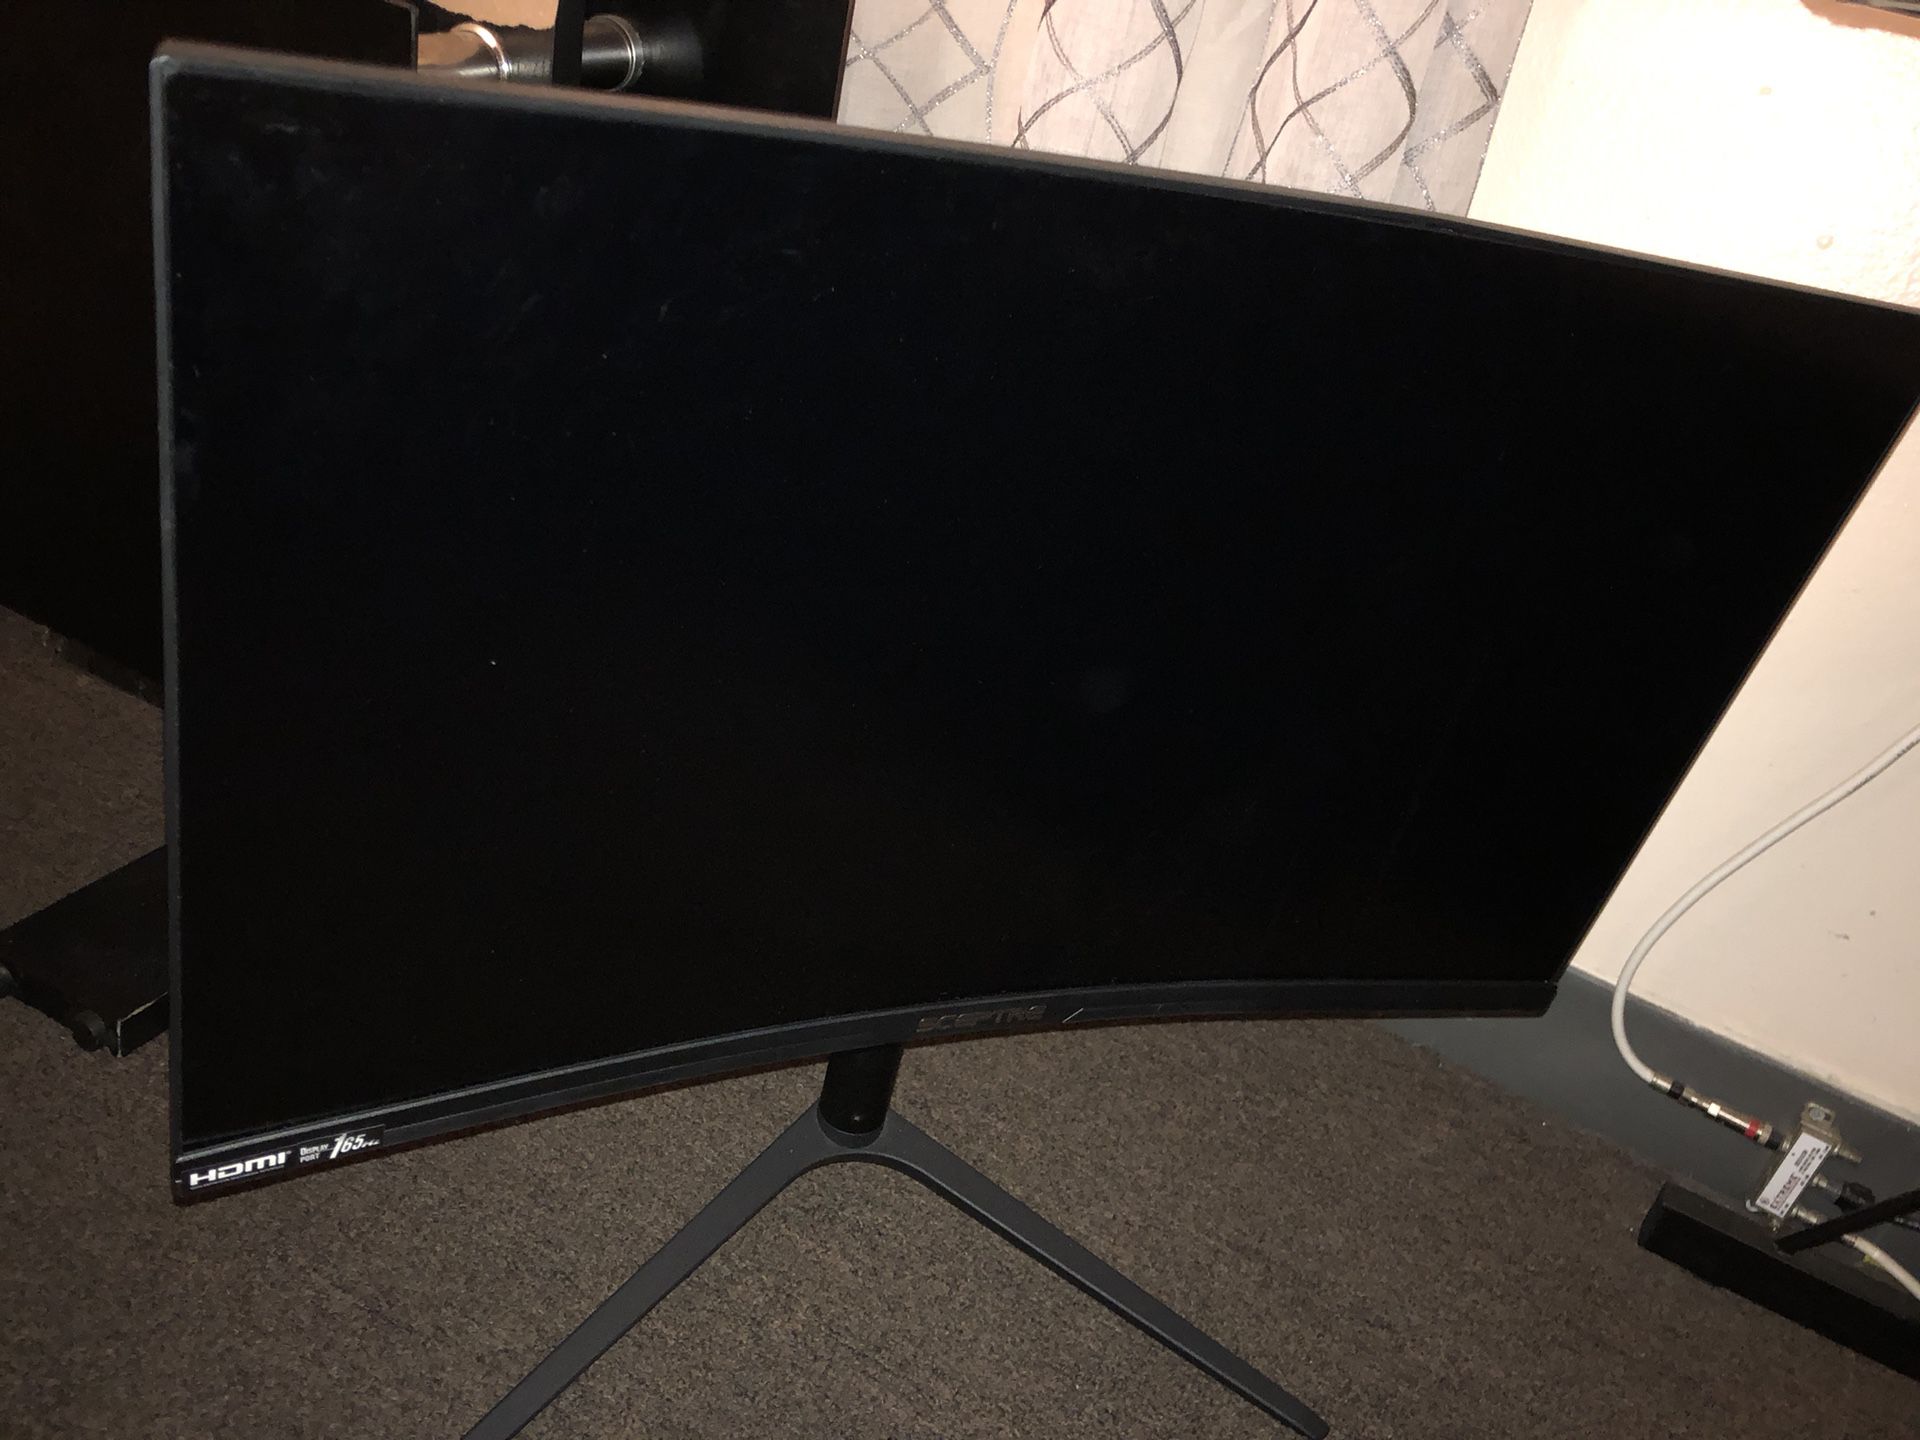 27” Sceptre Quad Had Curved Gaming Monitor 